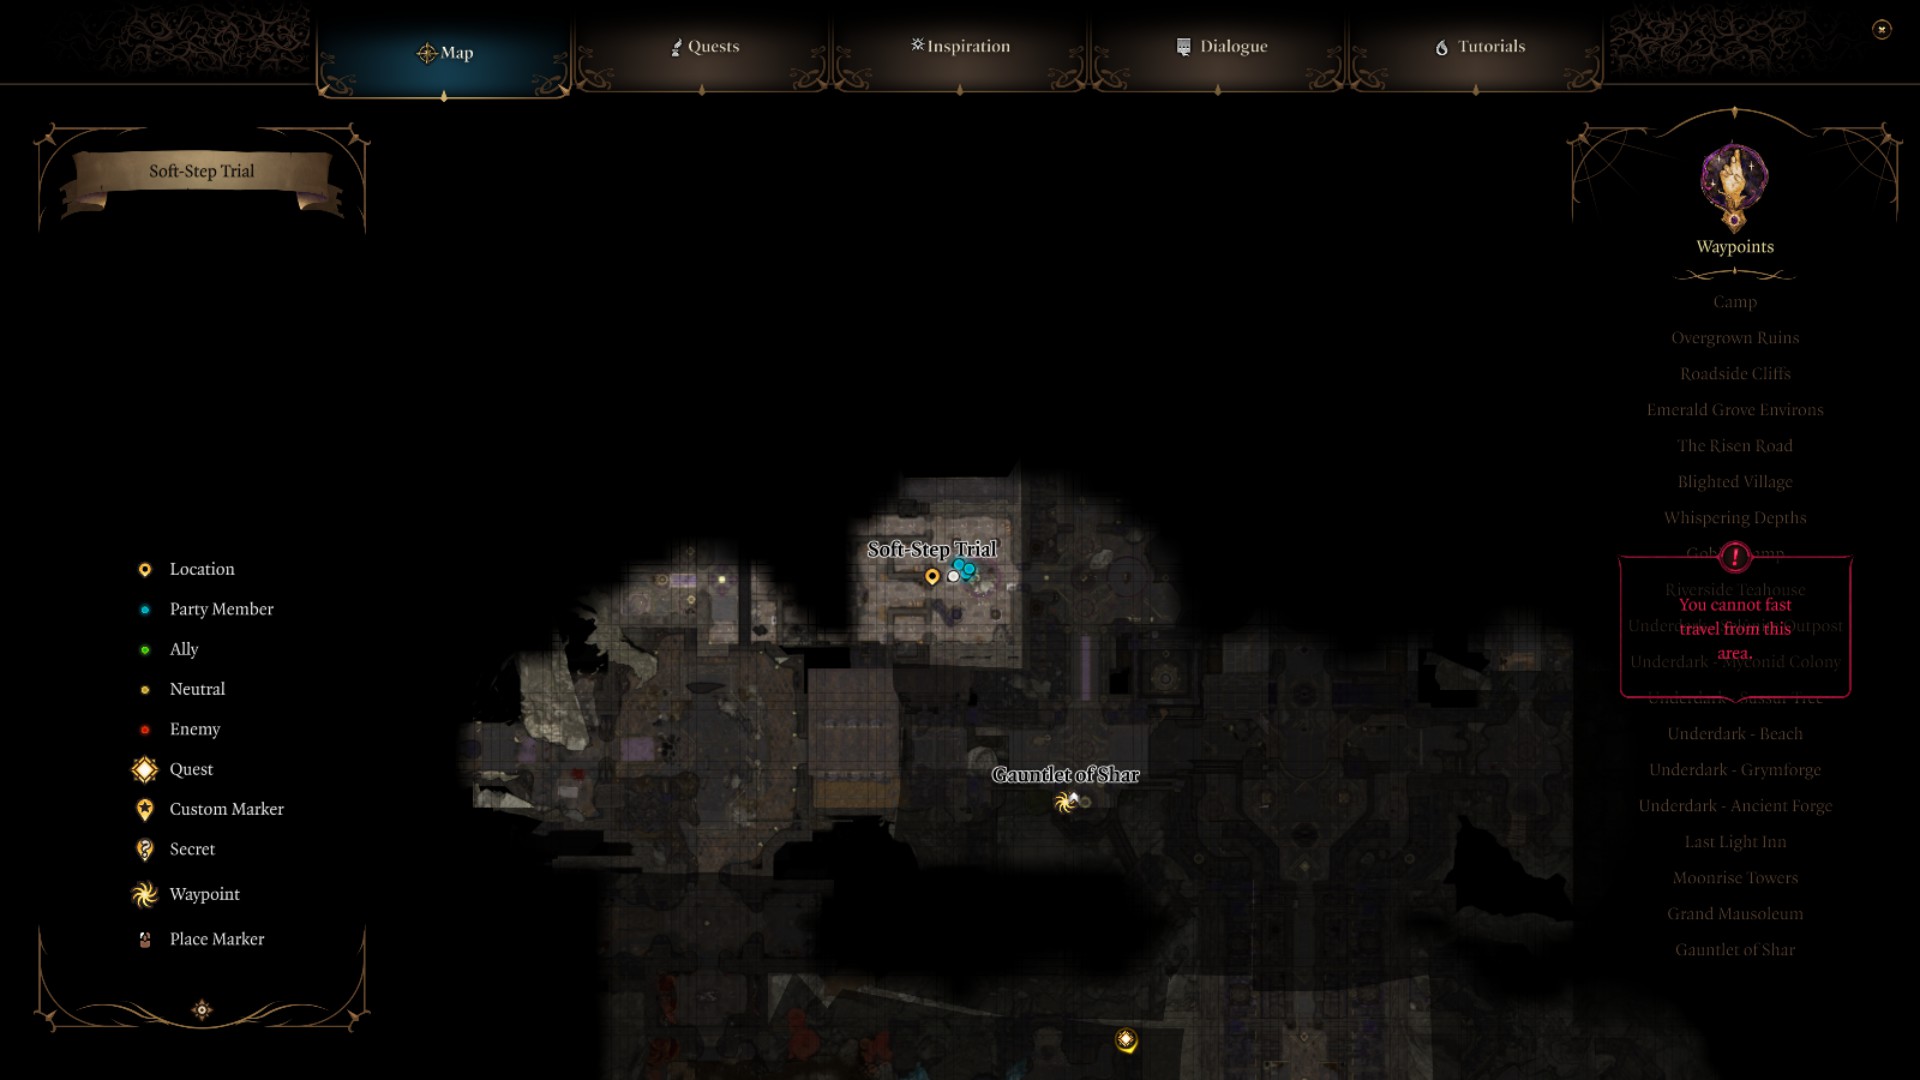 An image showing the location of the Soft-Step Trial in Baldur's Gate 3's Gauntlet of Shar.